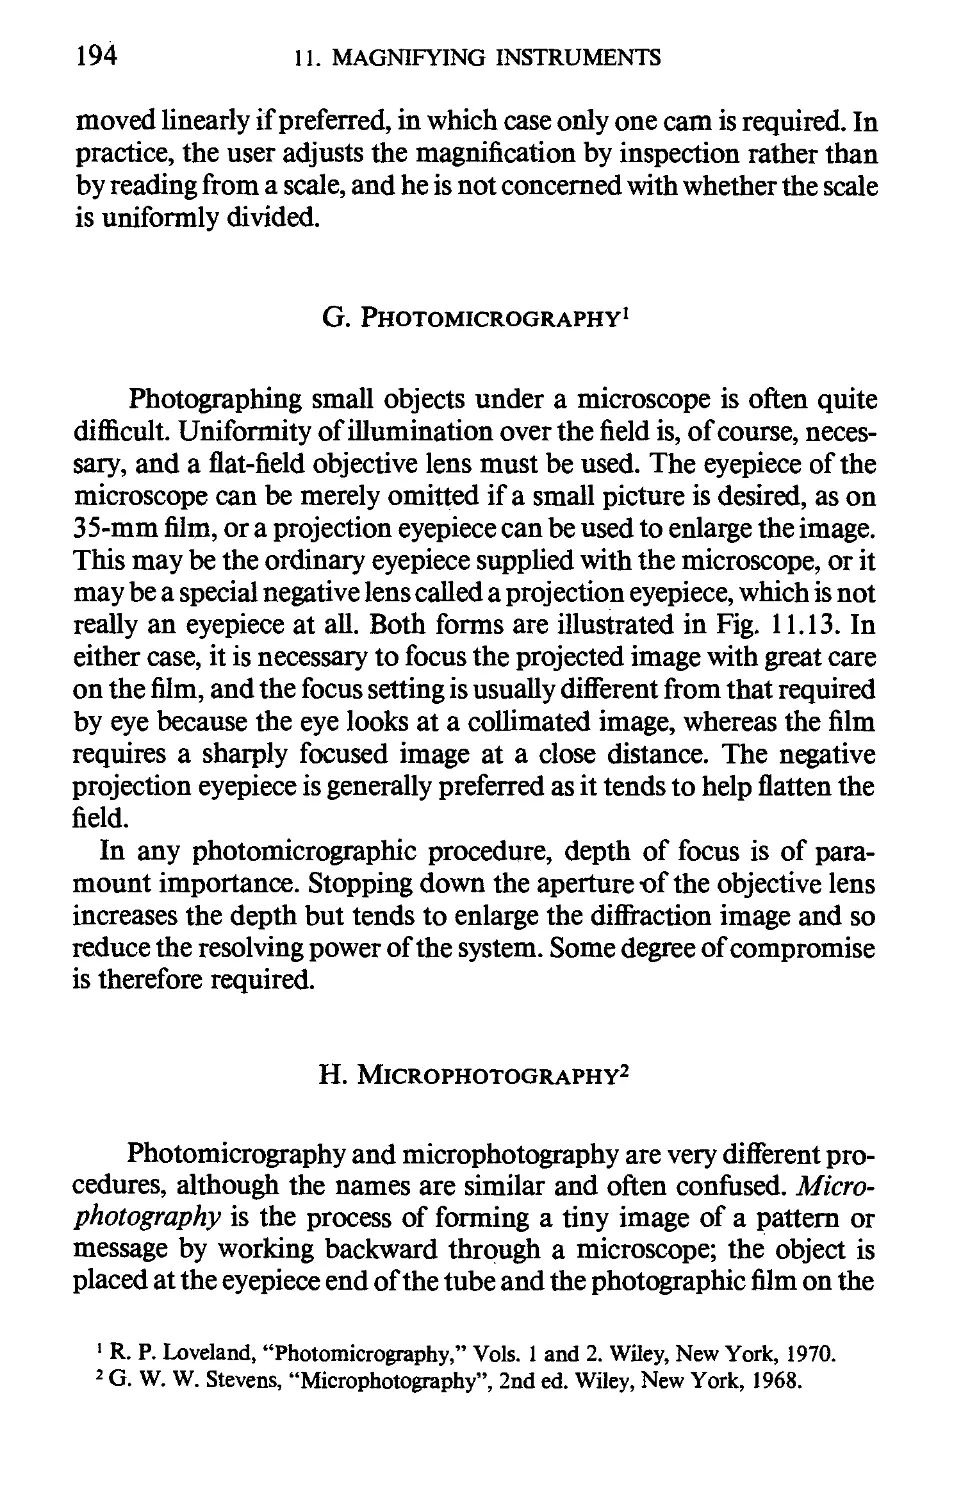 G. Photomicrography
H. Microphotography